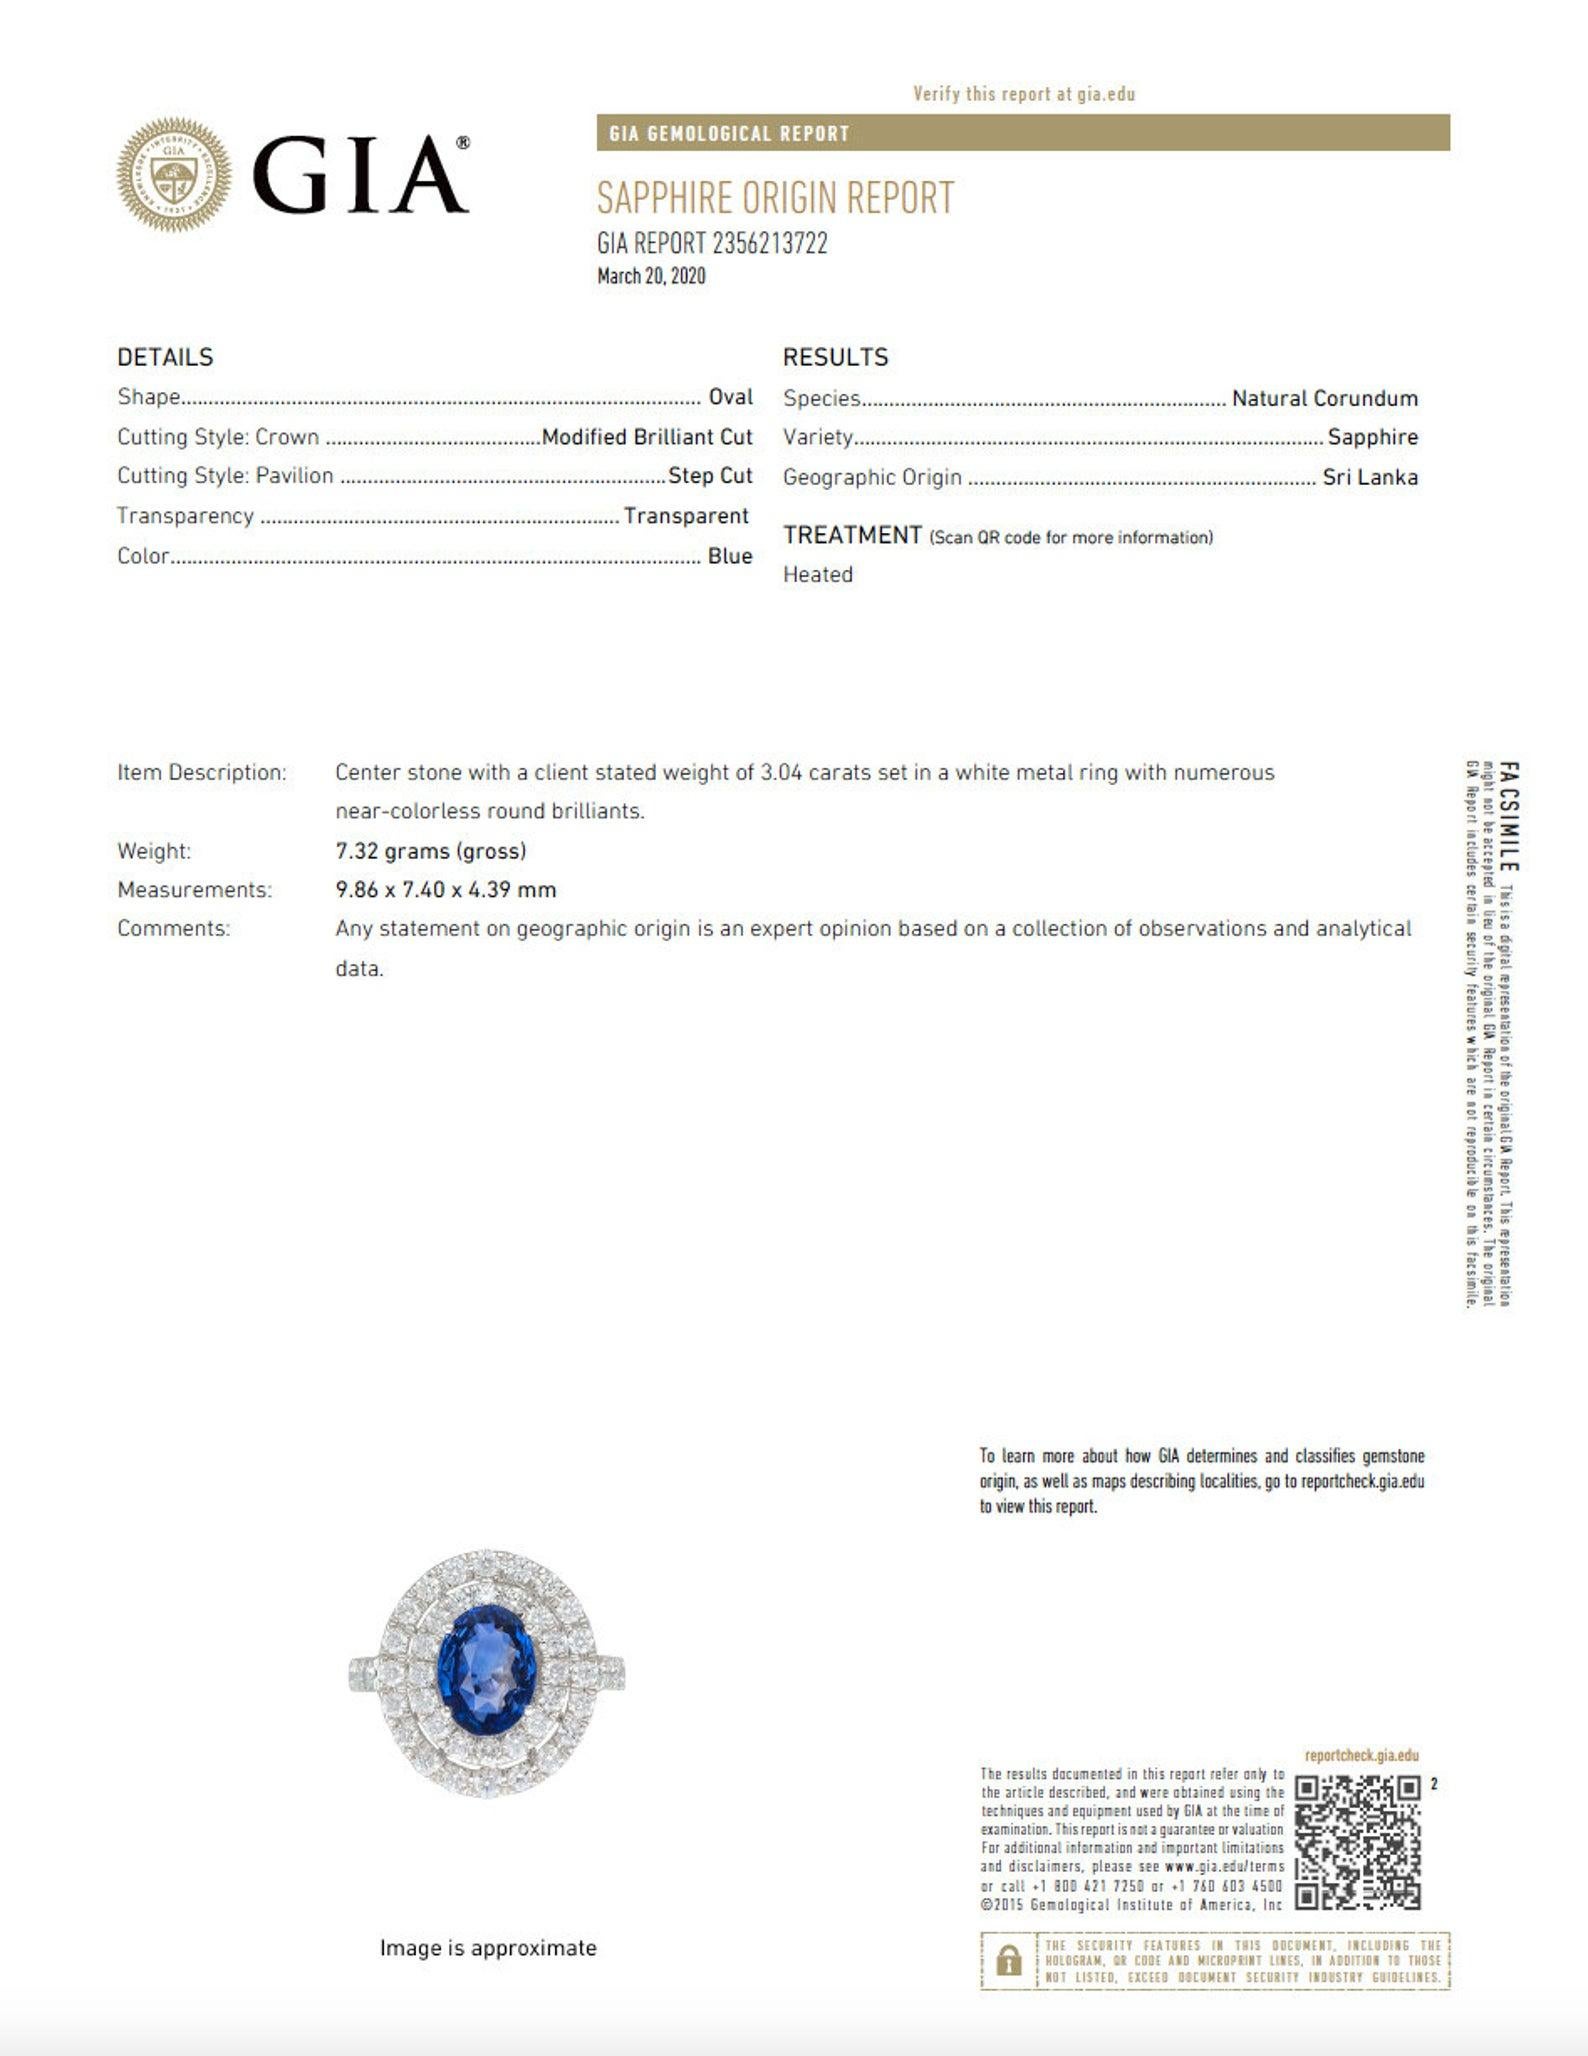 Product Specifications:
- 3.04ct (9.86 x 7.40 x 4.39 mm) High quality natural oval cut Blue Sapphire
Quality: Royal Blue color from Sri Lanka
- GIA Certificate included: GIA# 2356213722
- 46 Round Brilliant Cut High Quality Natural Diamonds with